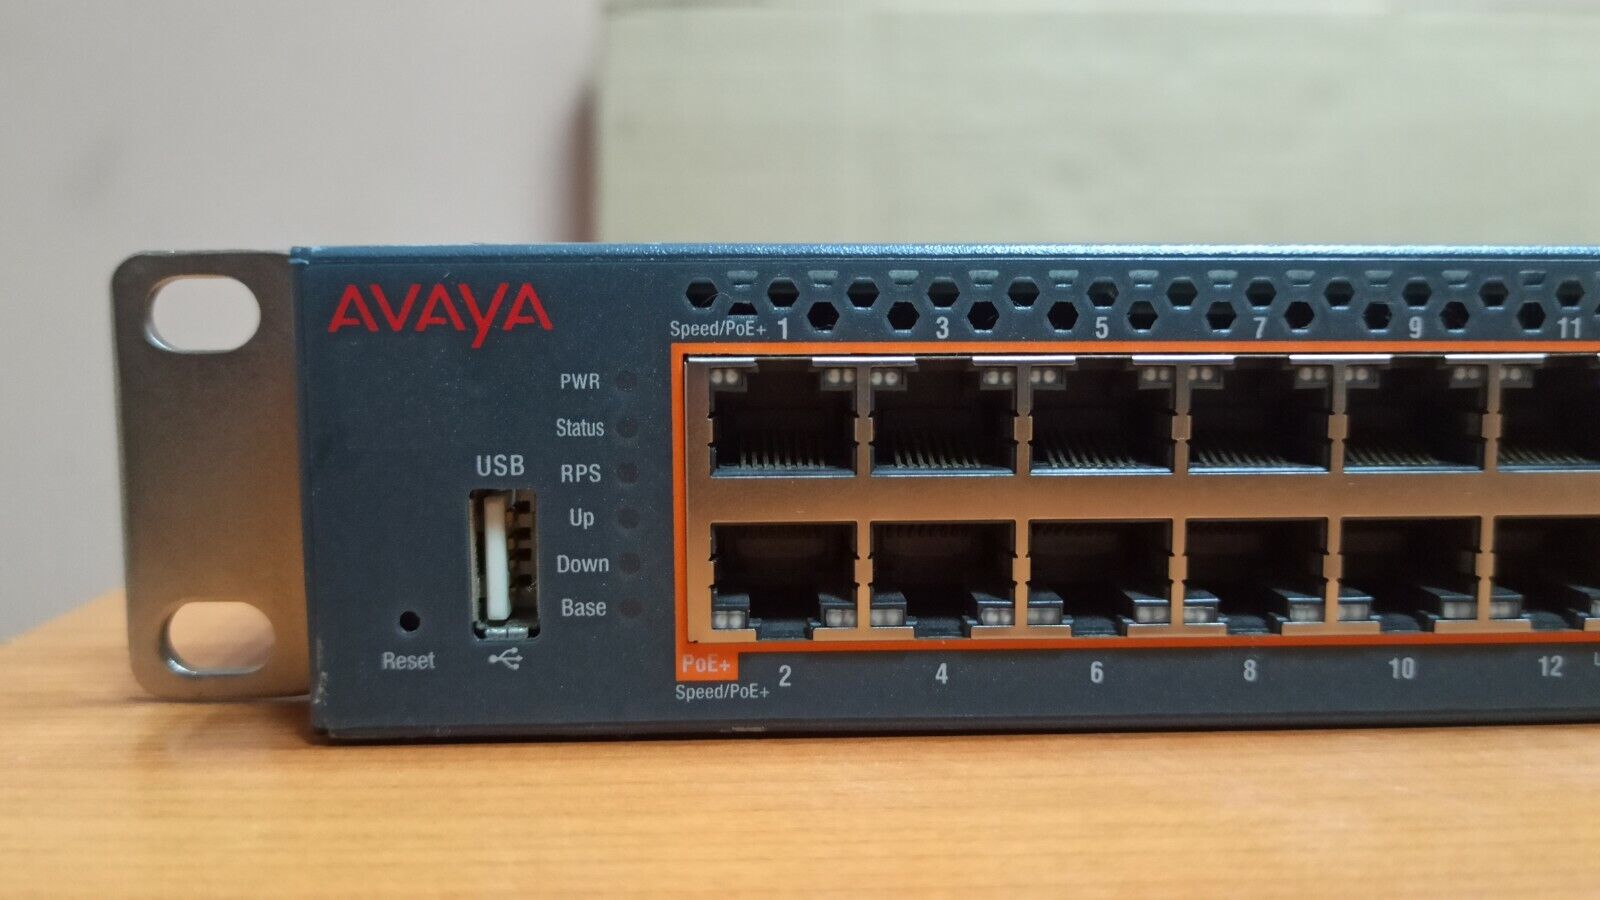 AVAYA AL4900A04-E6 4950GTS-PWR+ 4900 SERIES EXTREME ETHERNET ROUTING SWITCH